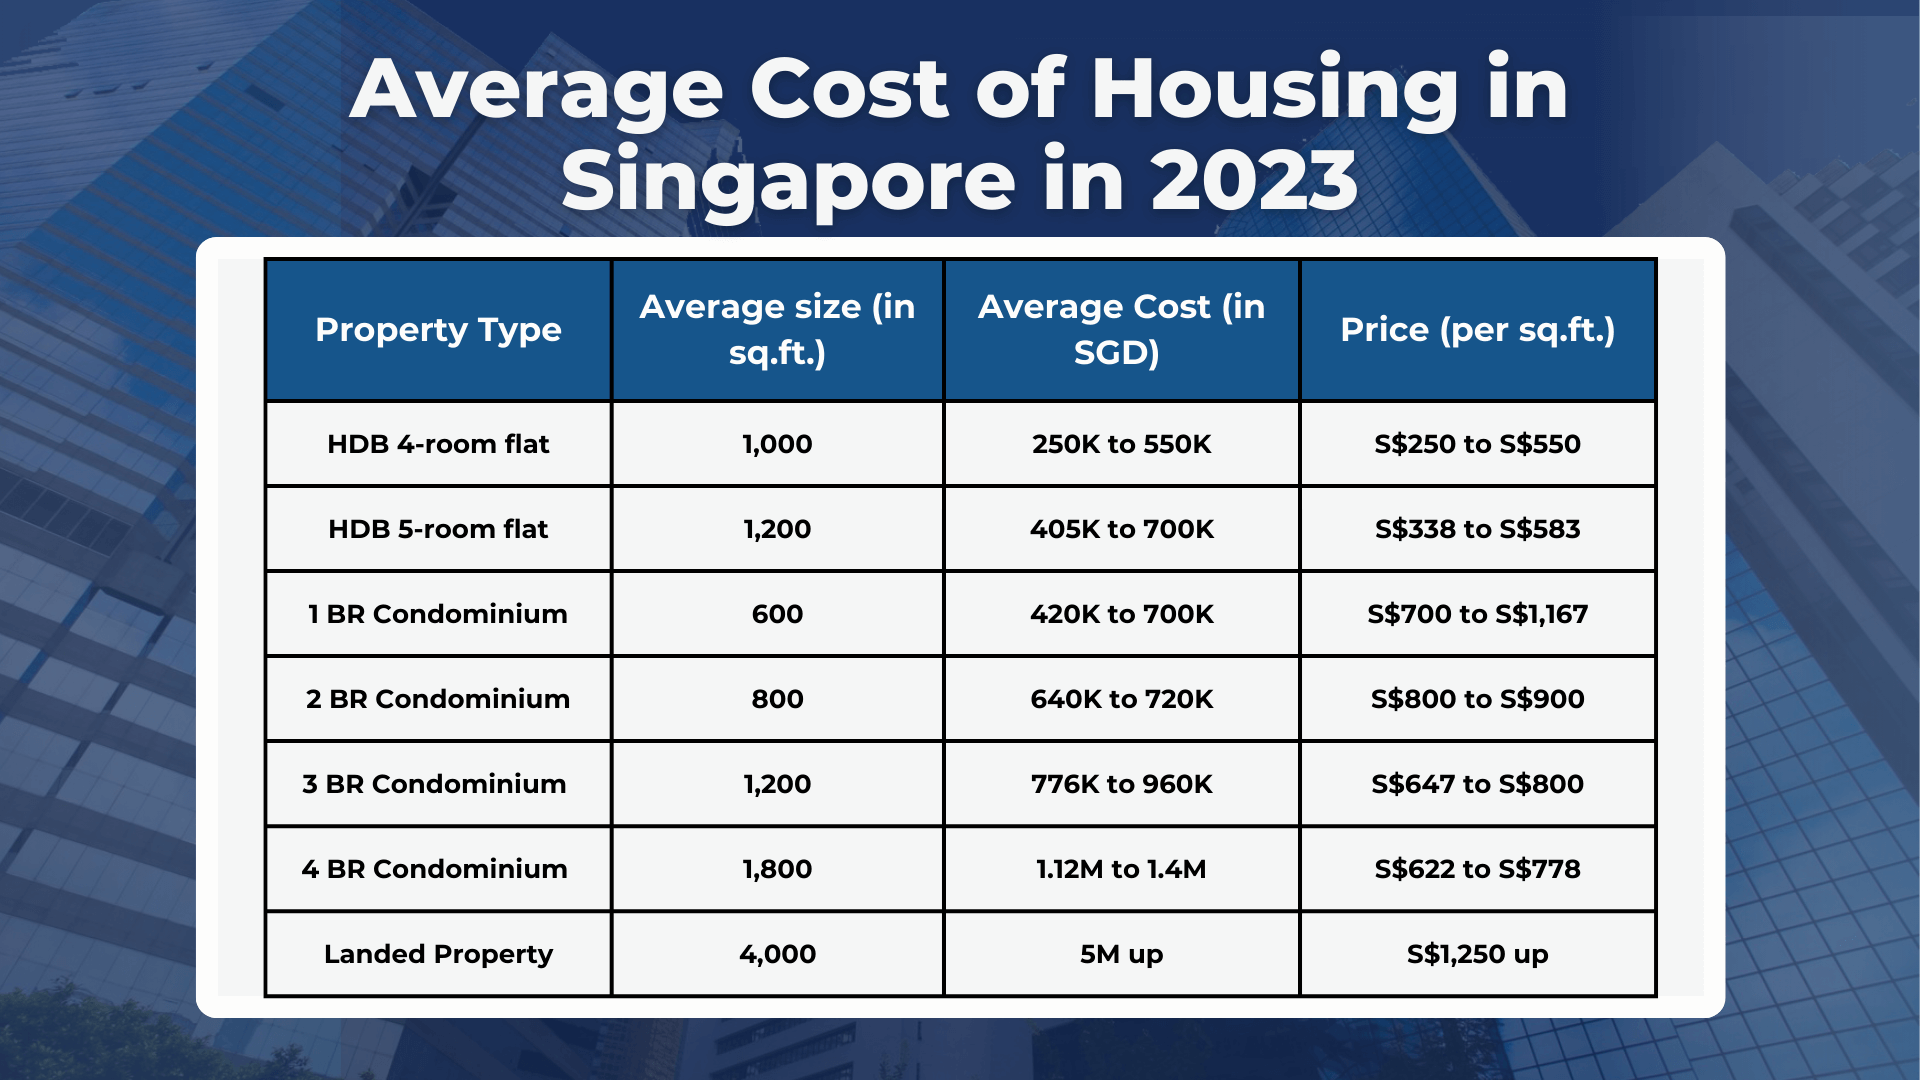 Average Cost of Housing in 2023